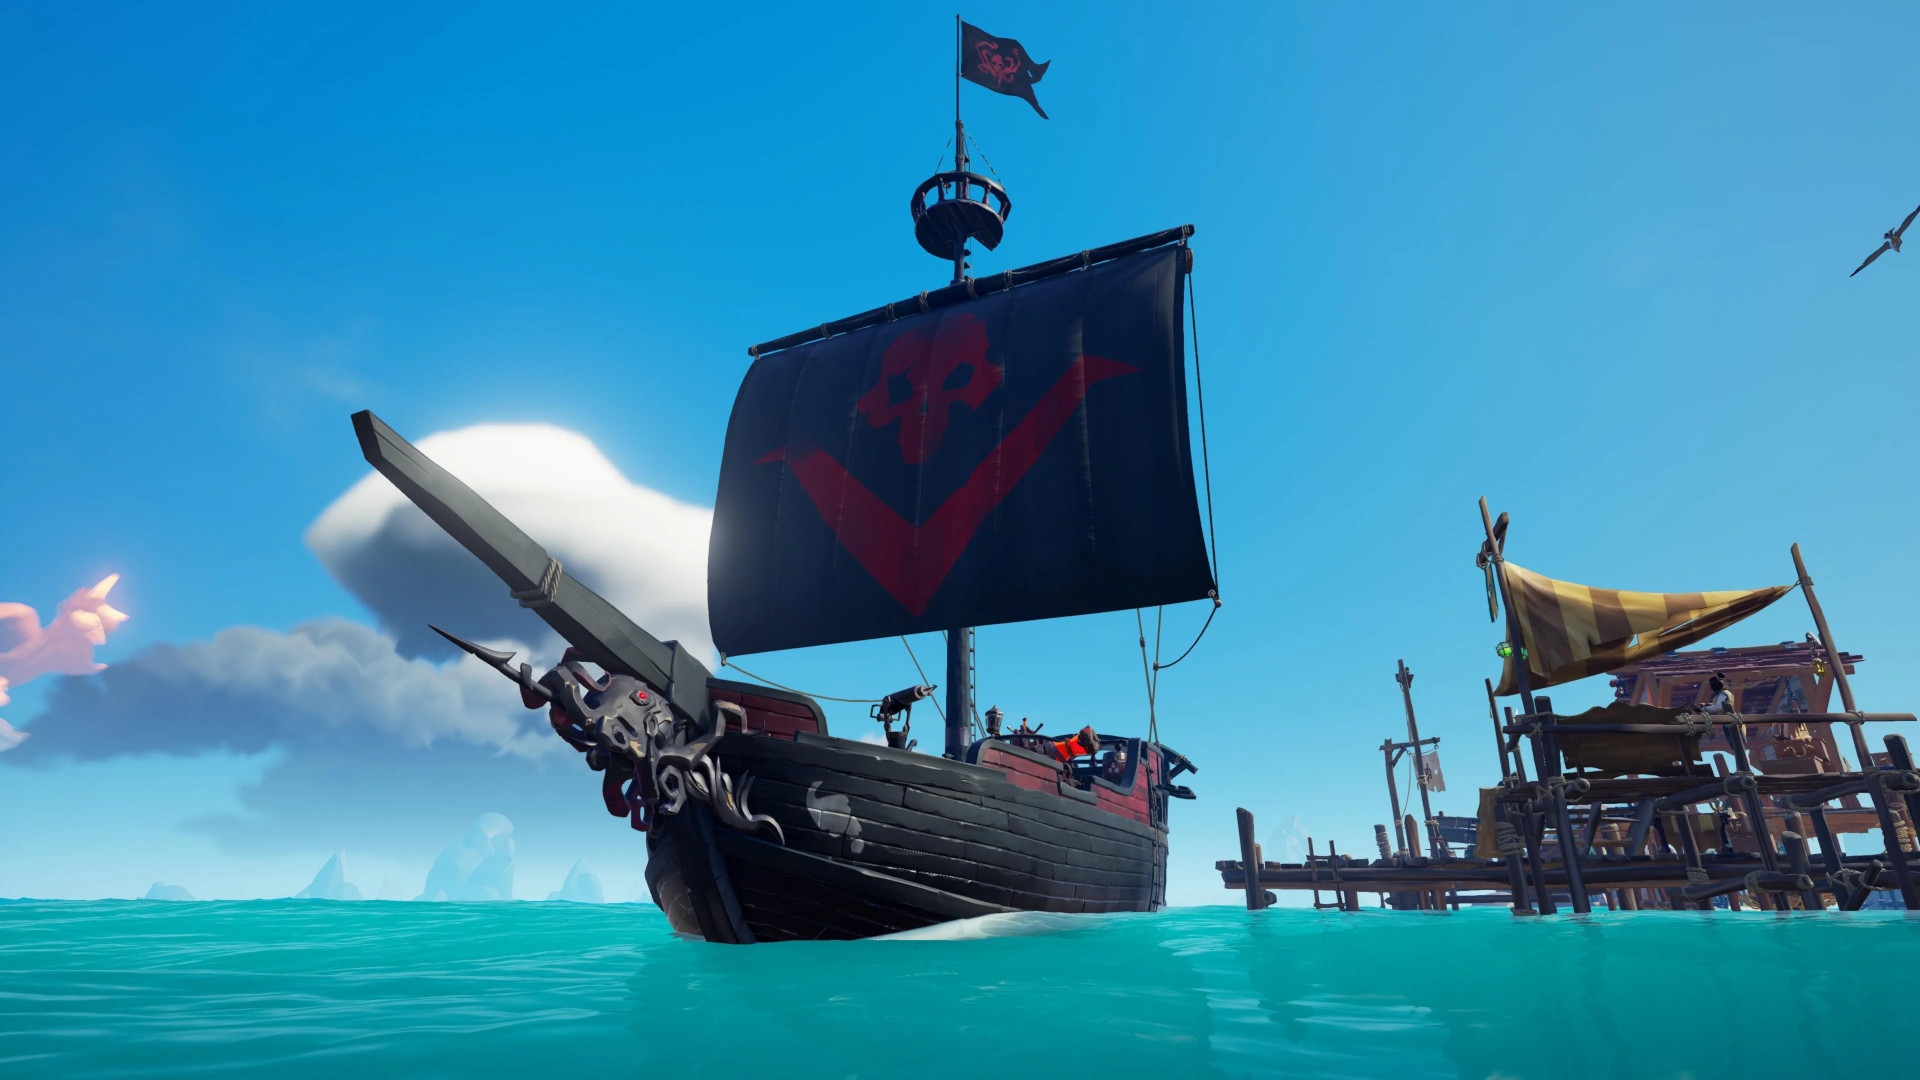 Sea of Thieves - Sails of the Bonny Belle DLC XBOX One / Windows 10 CD Key 89.27 $